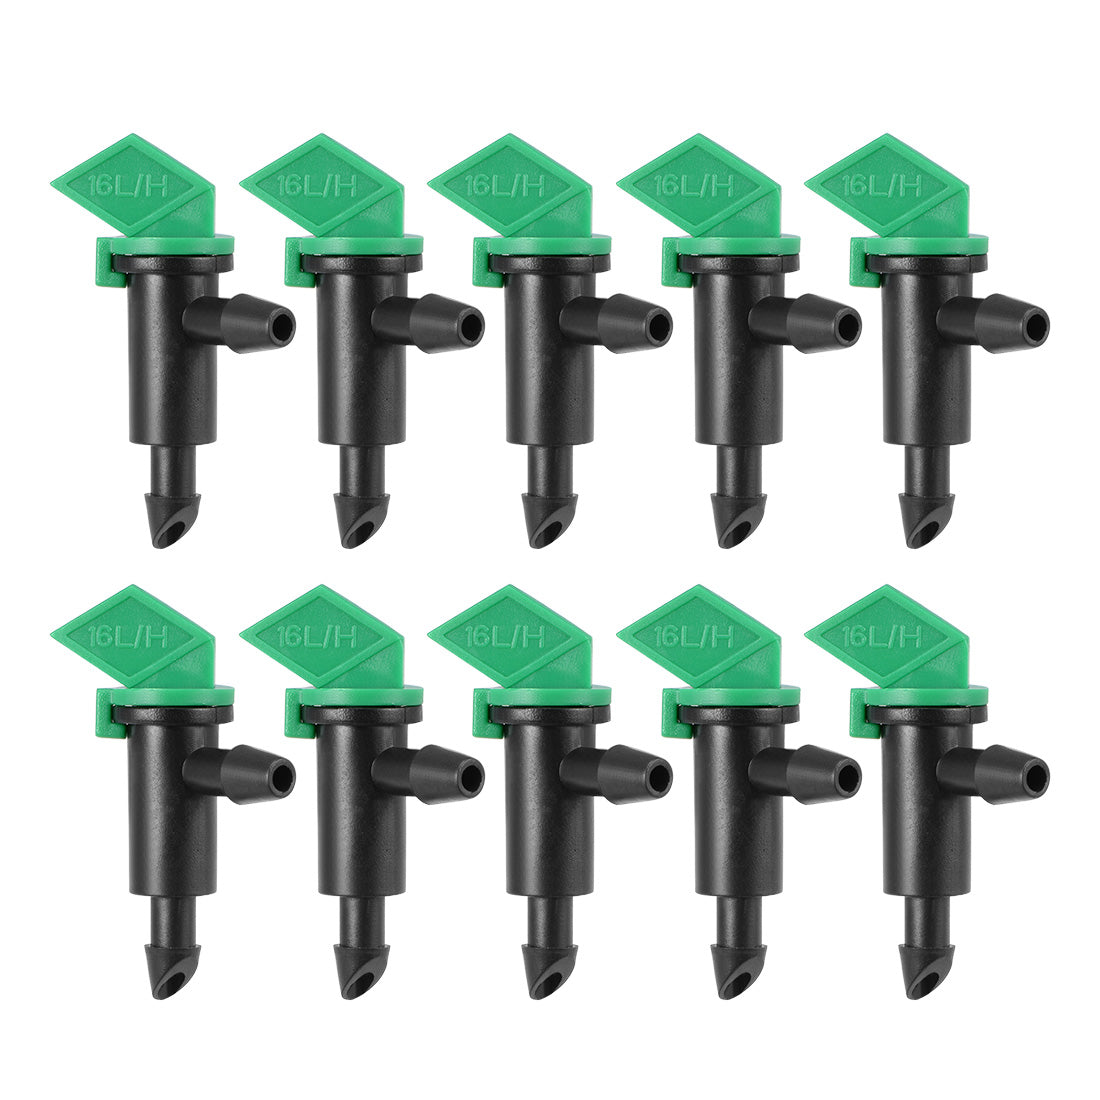 uxcell Uxcell Flag Dripper 4 GPH 16L/H Emitter Sprinkler for Garden Lawn Drip Irrigation Connect 4/7mm Hose, Plastic 10pcs